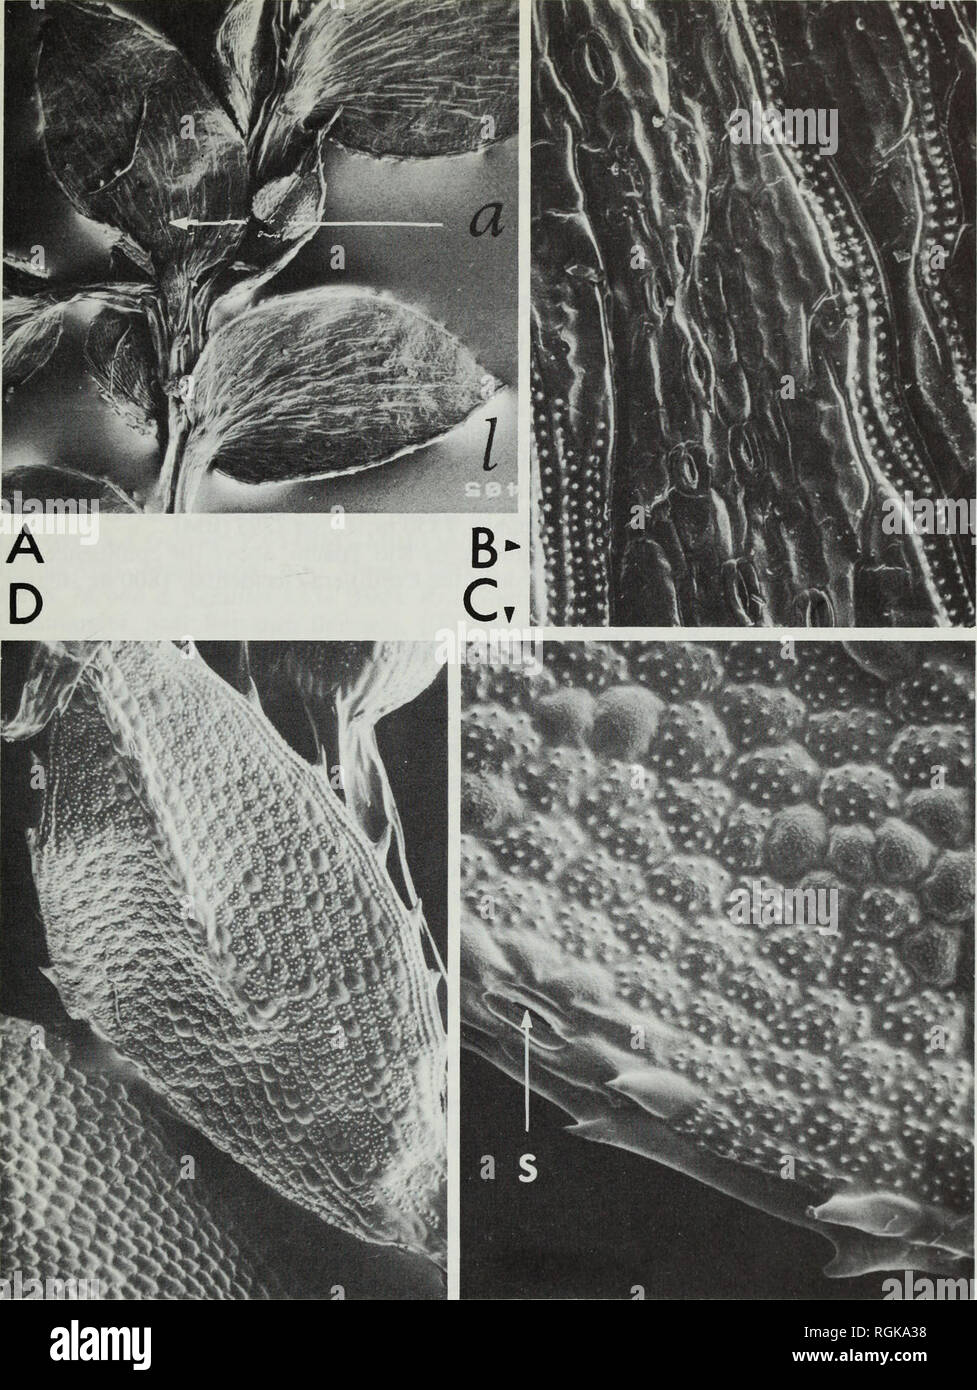 . Bulletin of the British Museum (Natural History). Botany; Botany. SELAGINELLA IN TROPICAL SOUTH AMERICA 271. Fig. 8 Selaginella JJacca Alston: A. Close-up of lateral (/) and axillary (a) leaves, x 18. B. Lower epidermis of lateral leaf showing stomata and papillate ridges, x 190. C. Upper epidermis of lateral leaf showing stoma (s) on margin, x 340. D. Close-up of median leaf, x 1 15. All from Ernst 1765. lati, non ramosi; sporophylla dimorpha, dorsalia viridia oblique anguste oblongo-lanceolata, distanter serrata, apice acuto; ventralia hyalina, aequilateralia anguste oblongo-lanceolata, di Stock Photo